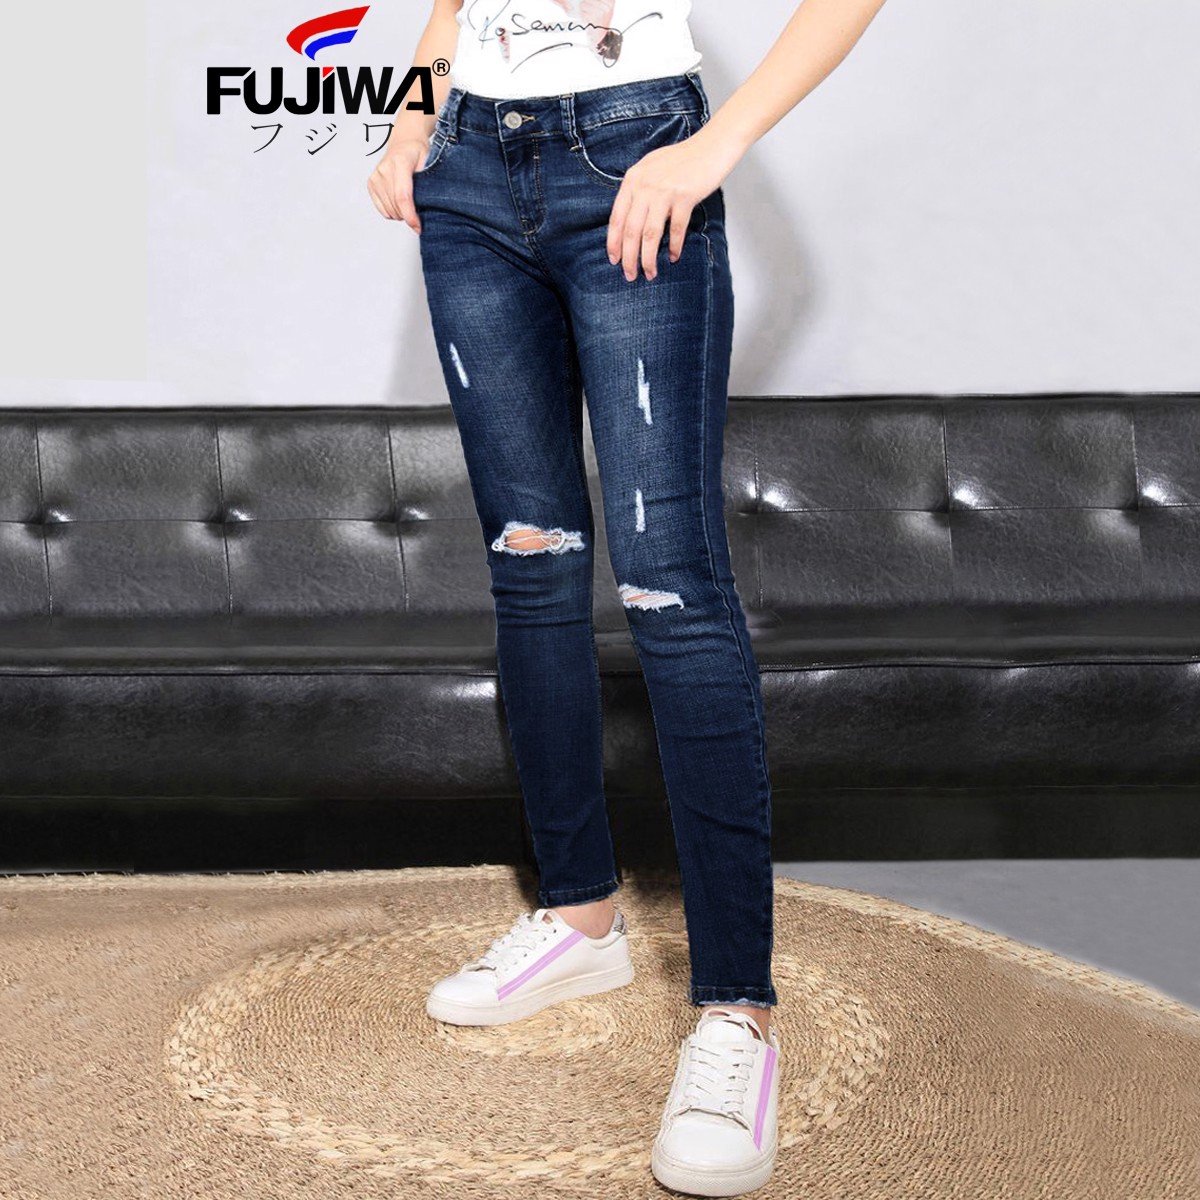 Fujiwa women s high-waisted straight jeans-QR. The jeans is very elastic